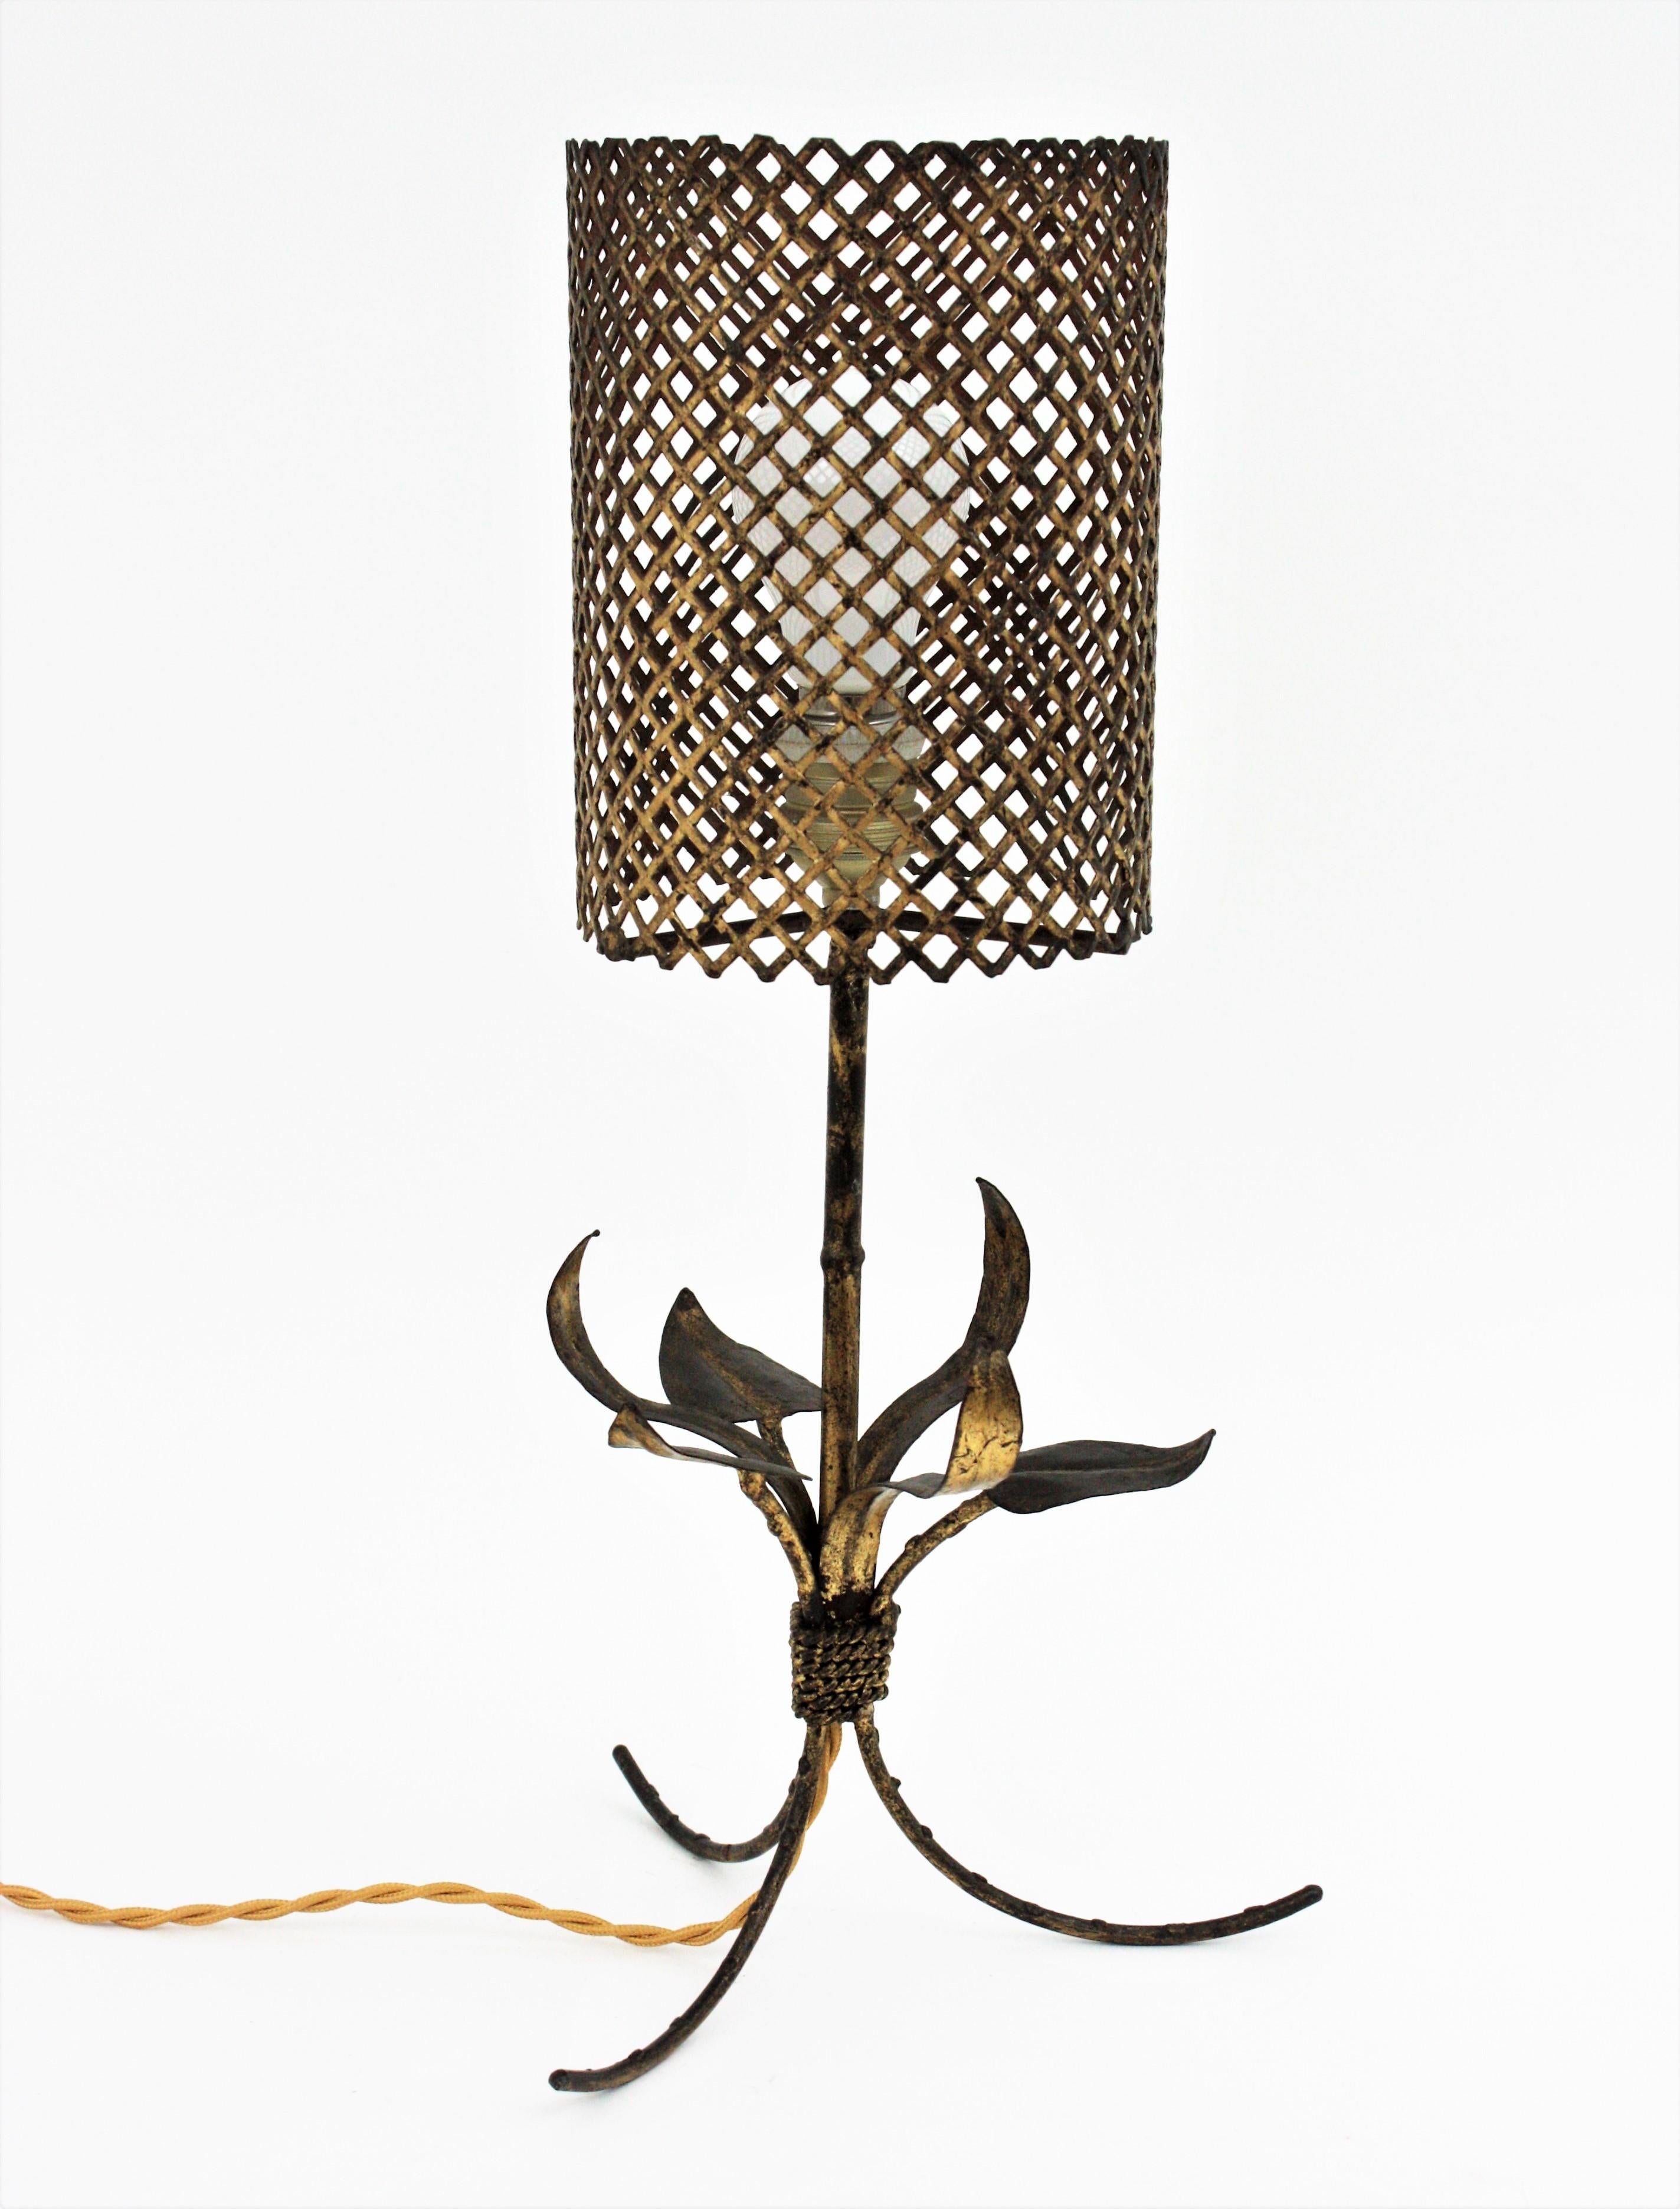 French Faux Bamboo Foliage Tripod Table Lamp in Gilt Metal, 1940s For Sale 2